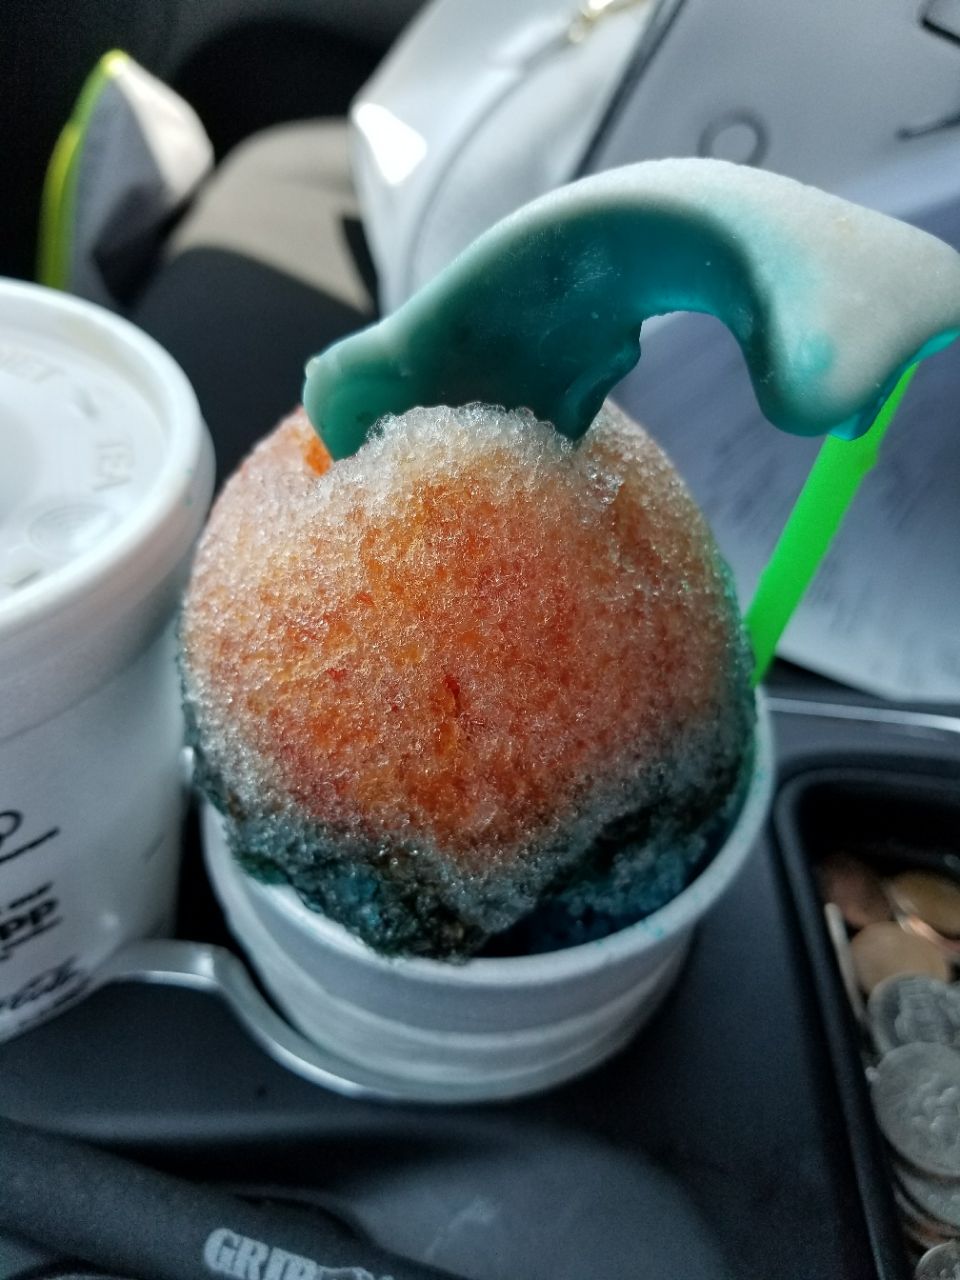 It's that time again! snow cones for the summer! Shark Attack! Blue Rasberry and Tigers blood flavors topped with gummy shark!